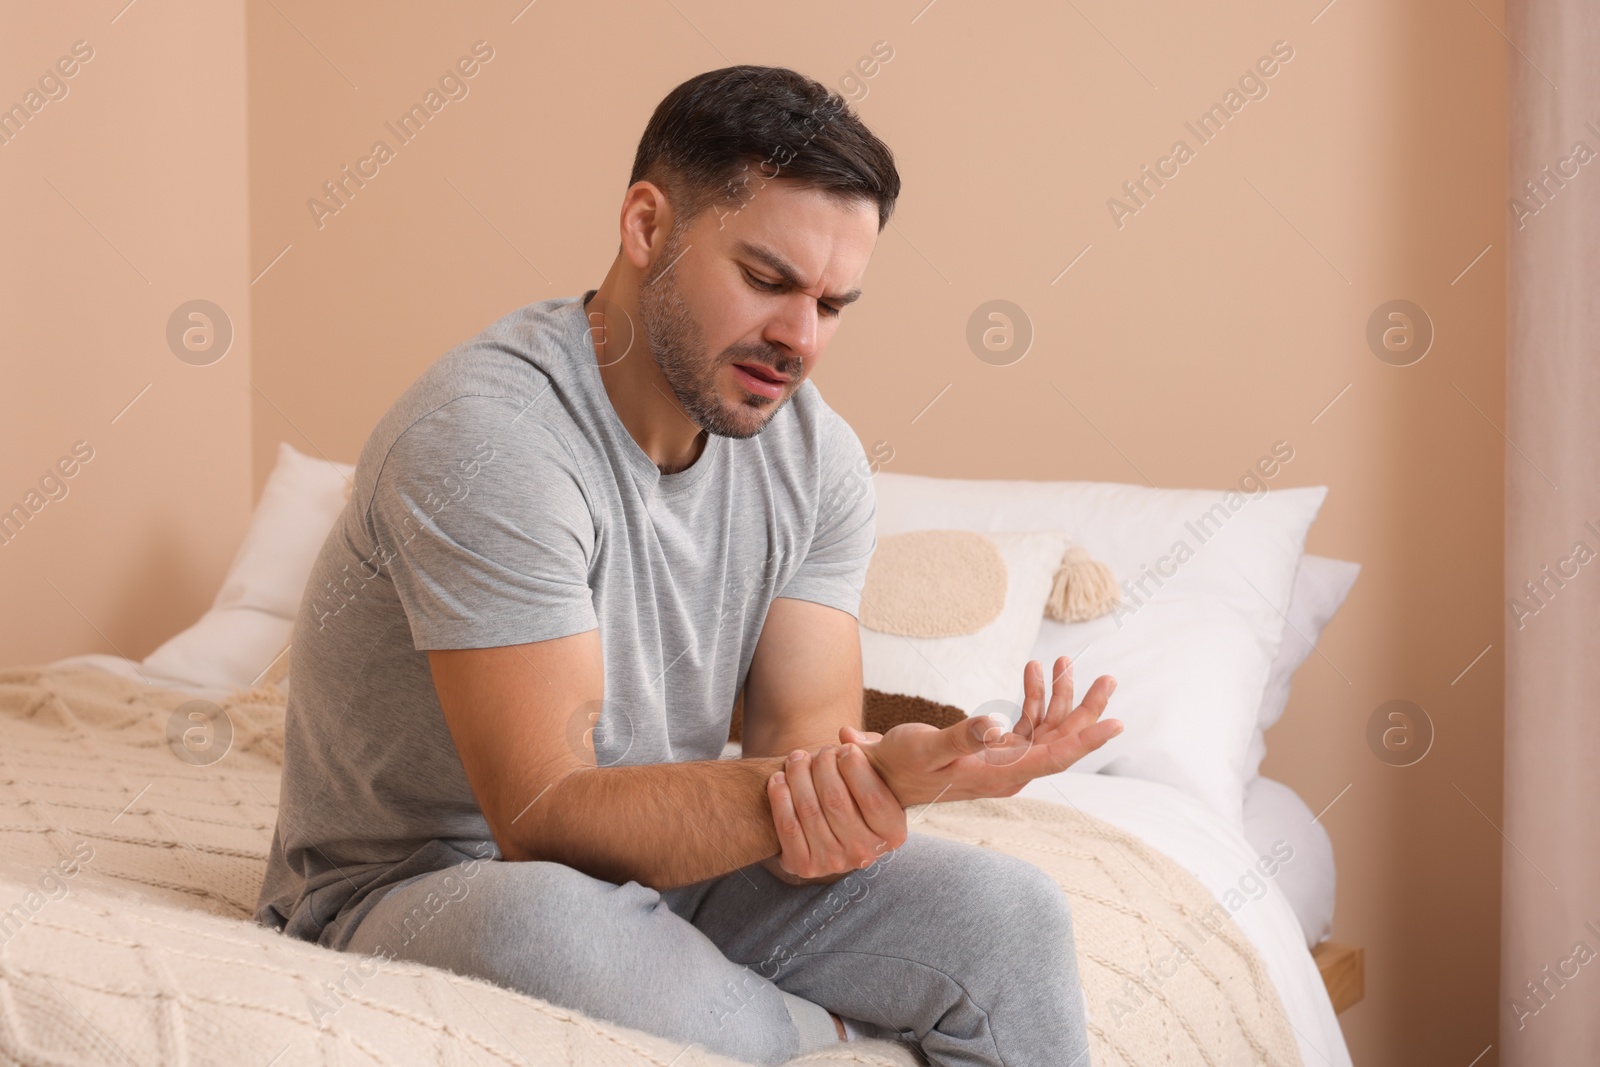 Photo of Man suffering from pain in his hand on bed indoors